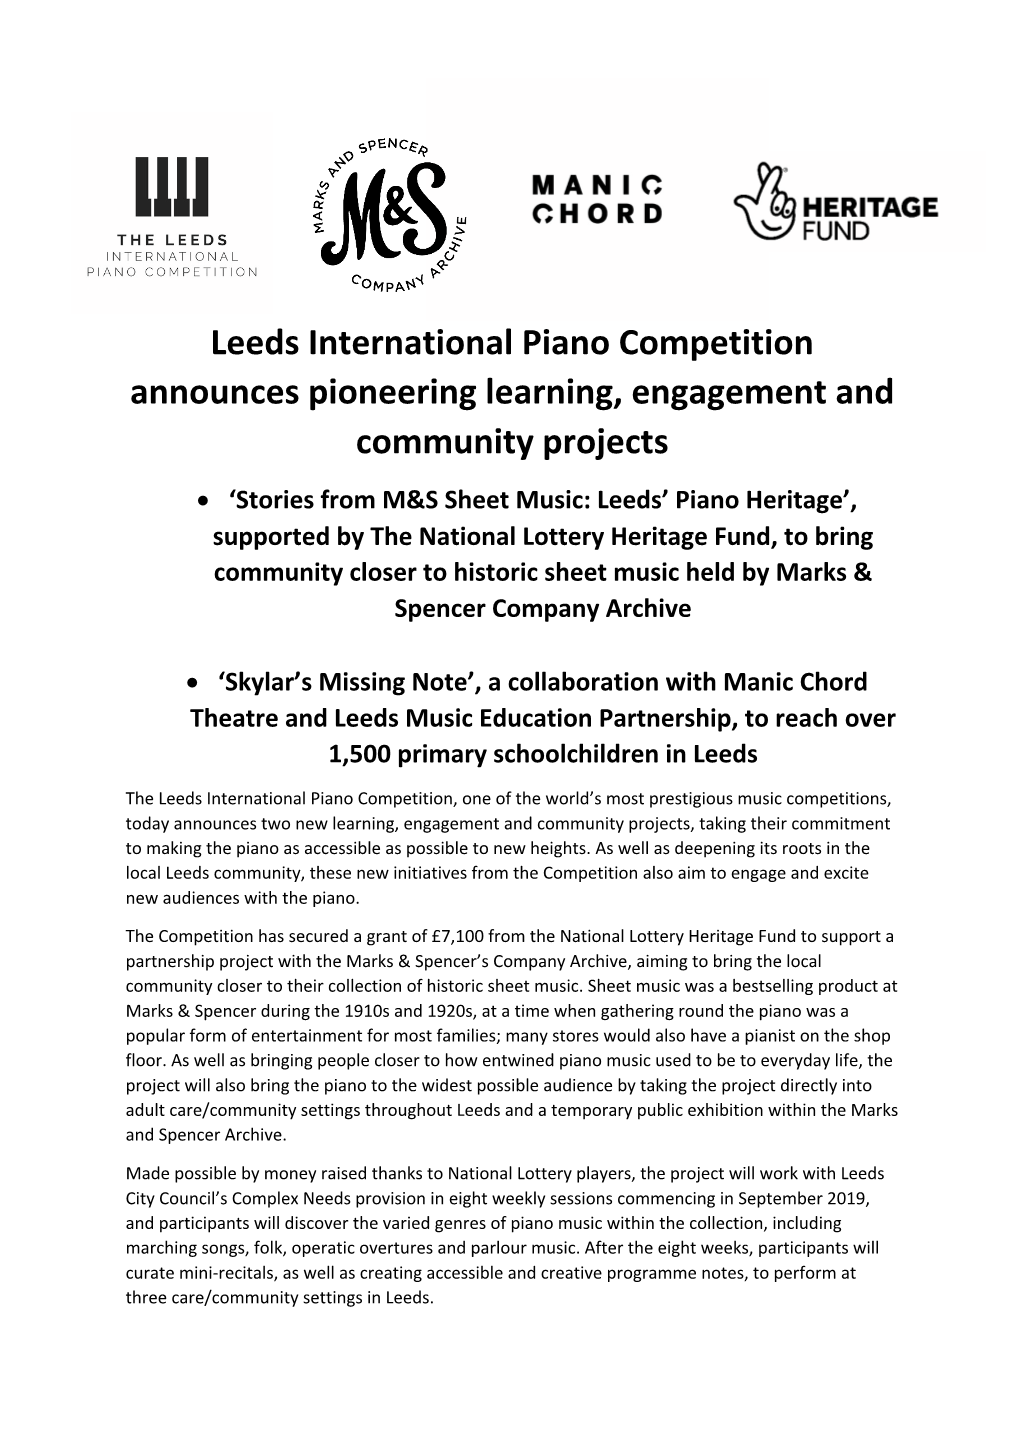 Leeds International Piano Competition Announces Pioneering Learning